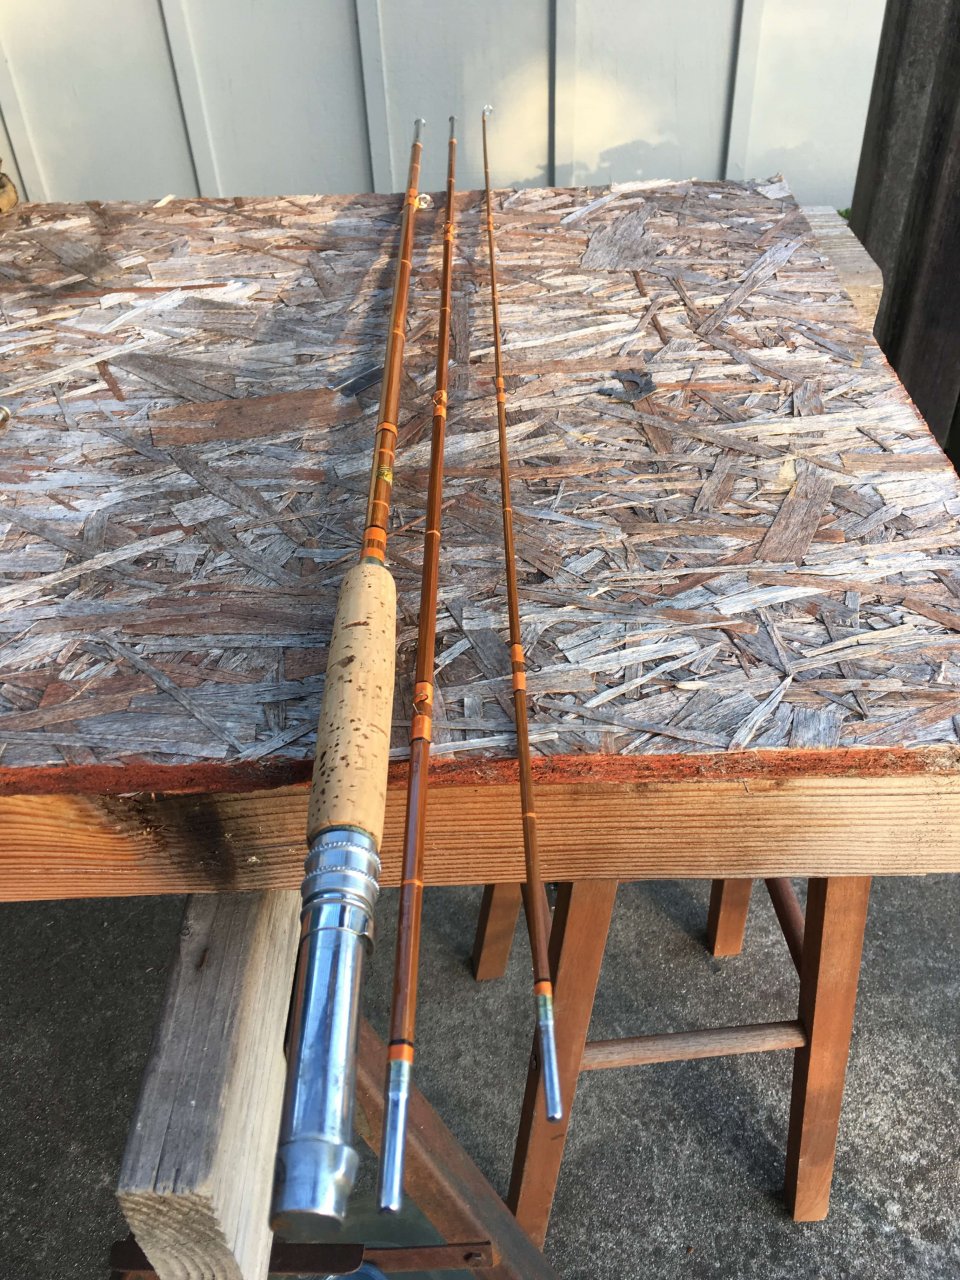 We Were Given Old Fly Fishing Poles In Great Condition And W